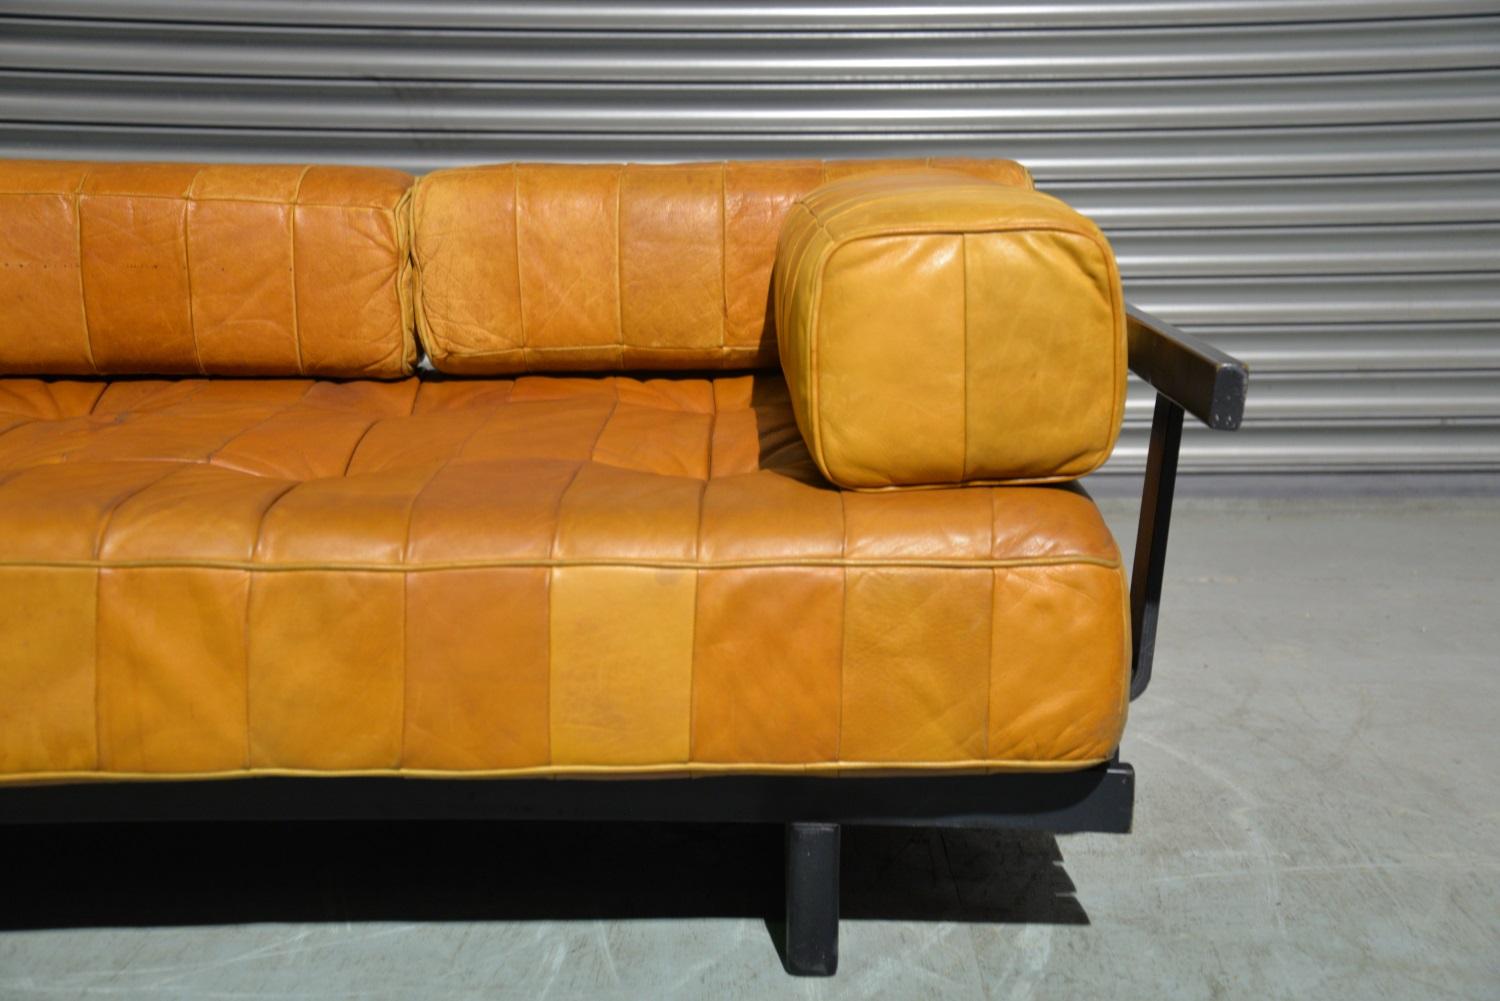 Vintage De Sede Ds 80 Patchwork Leather Daybed, Switzerland 1960s For Sale 6